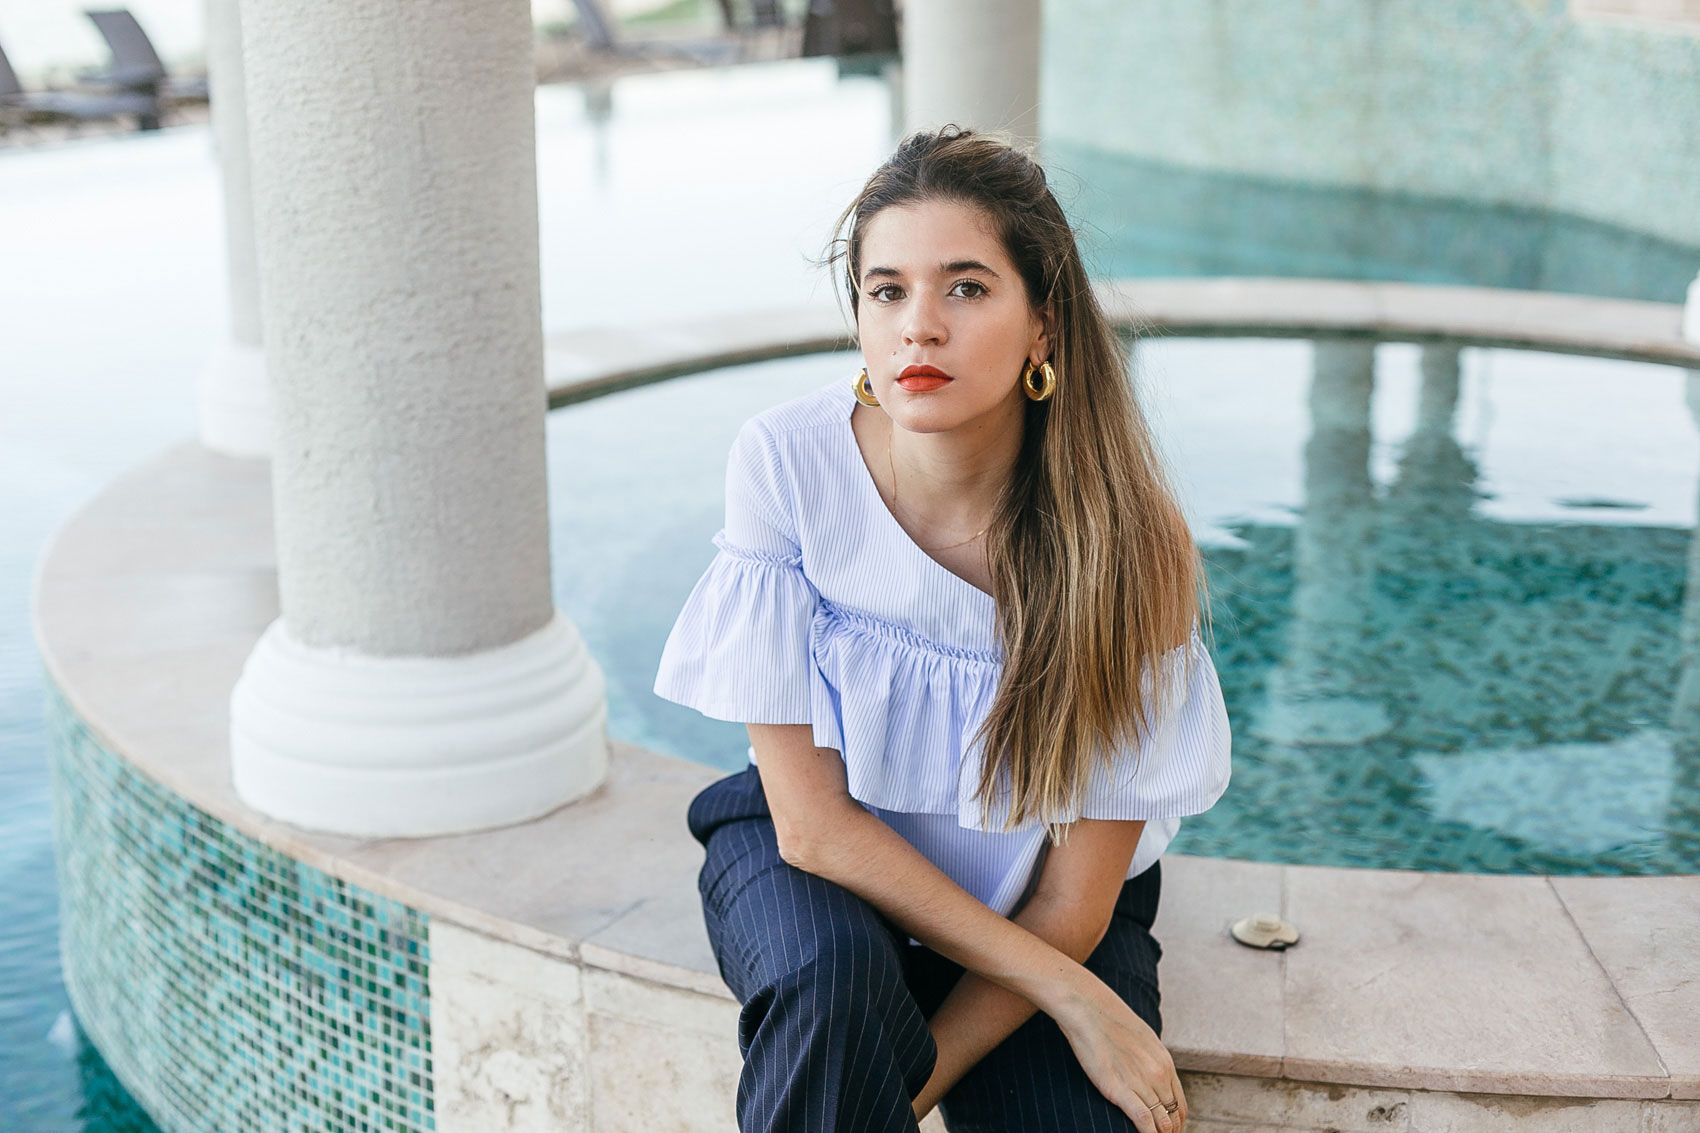 Maristella Gonzalez in a feminine ruffled one shoulder top from Zara, pinstripe pants from Polo Ralph Laurent, red lipstick and thick gold hoop earrings